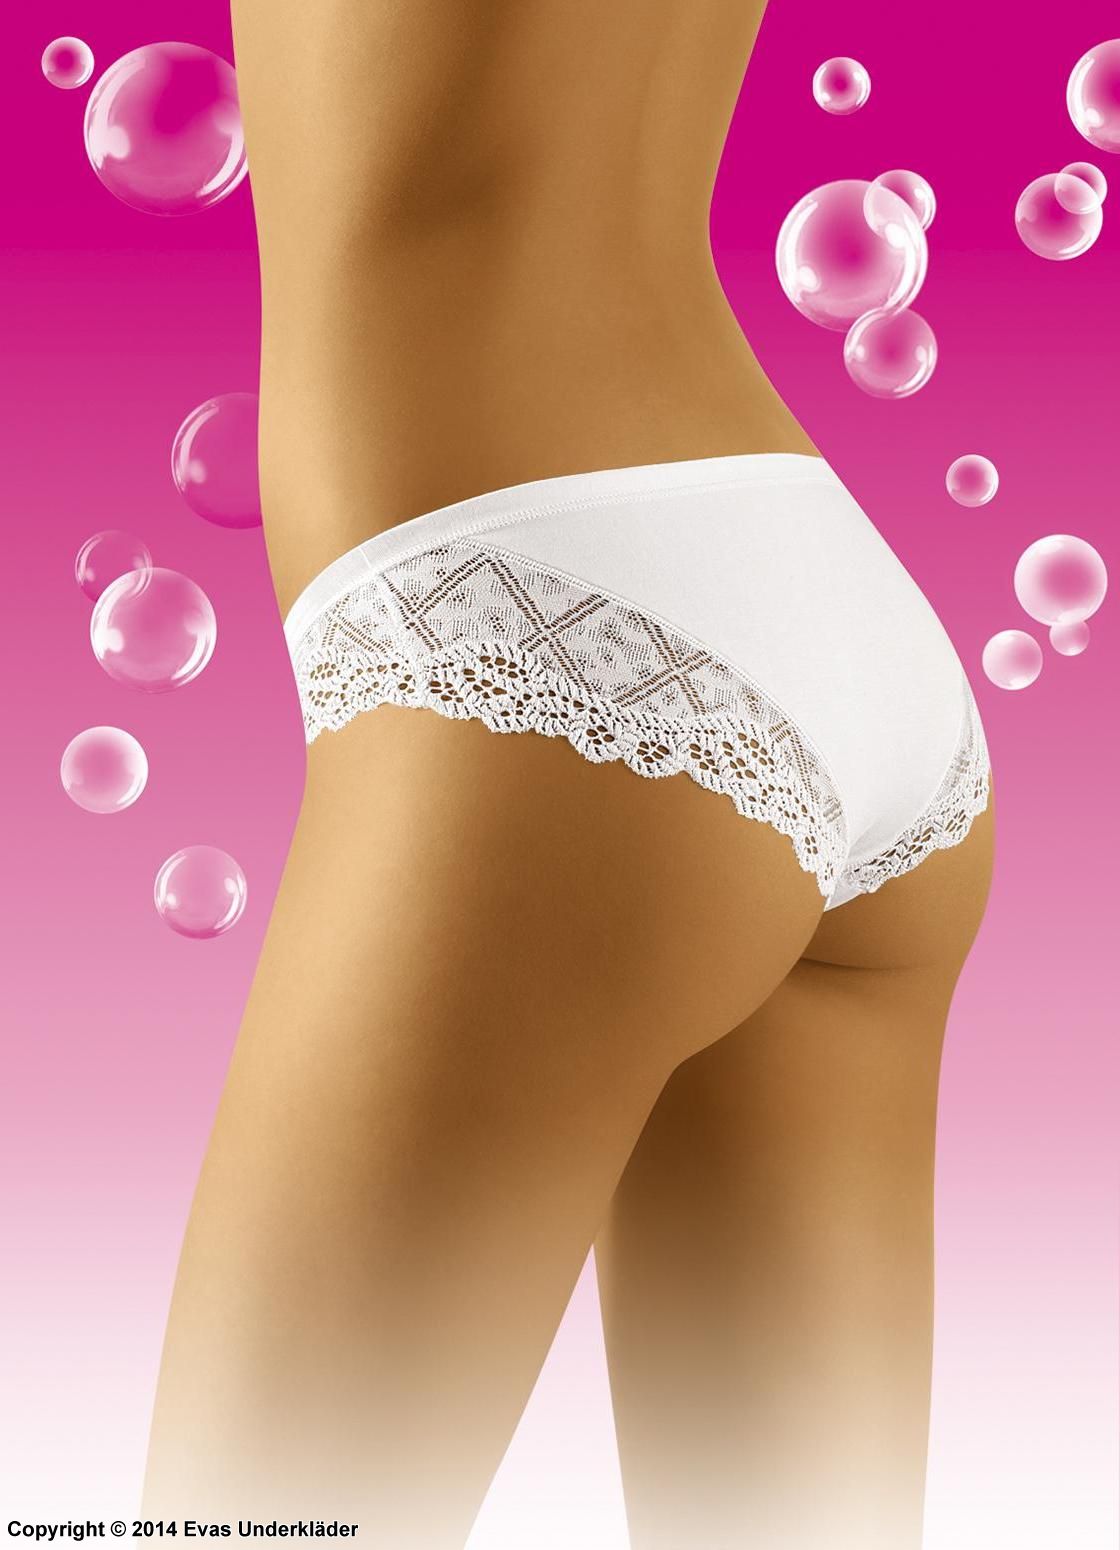 Soft panty with lace detailing